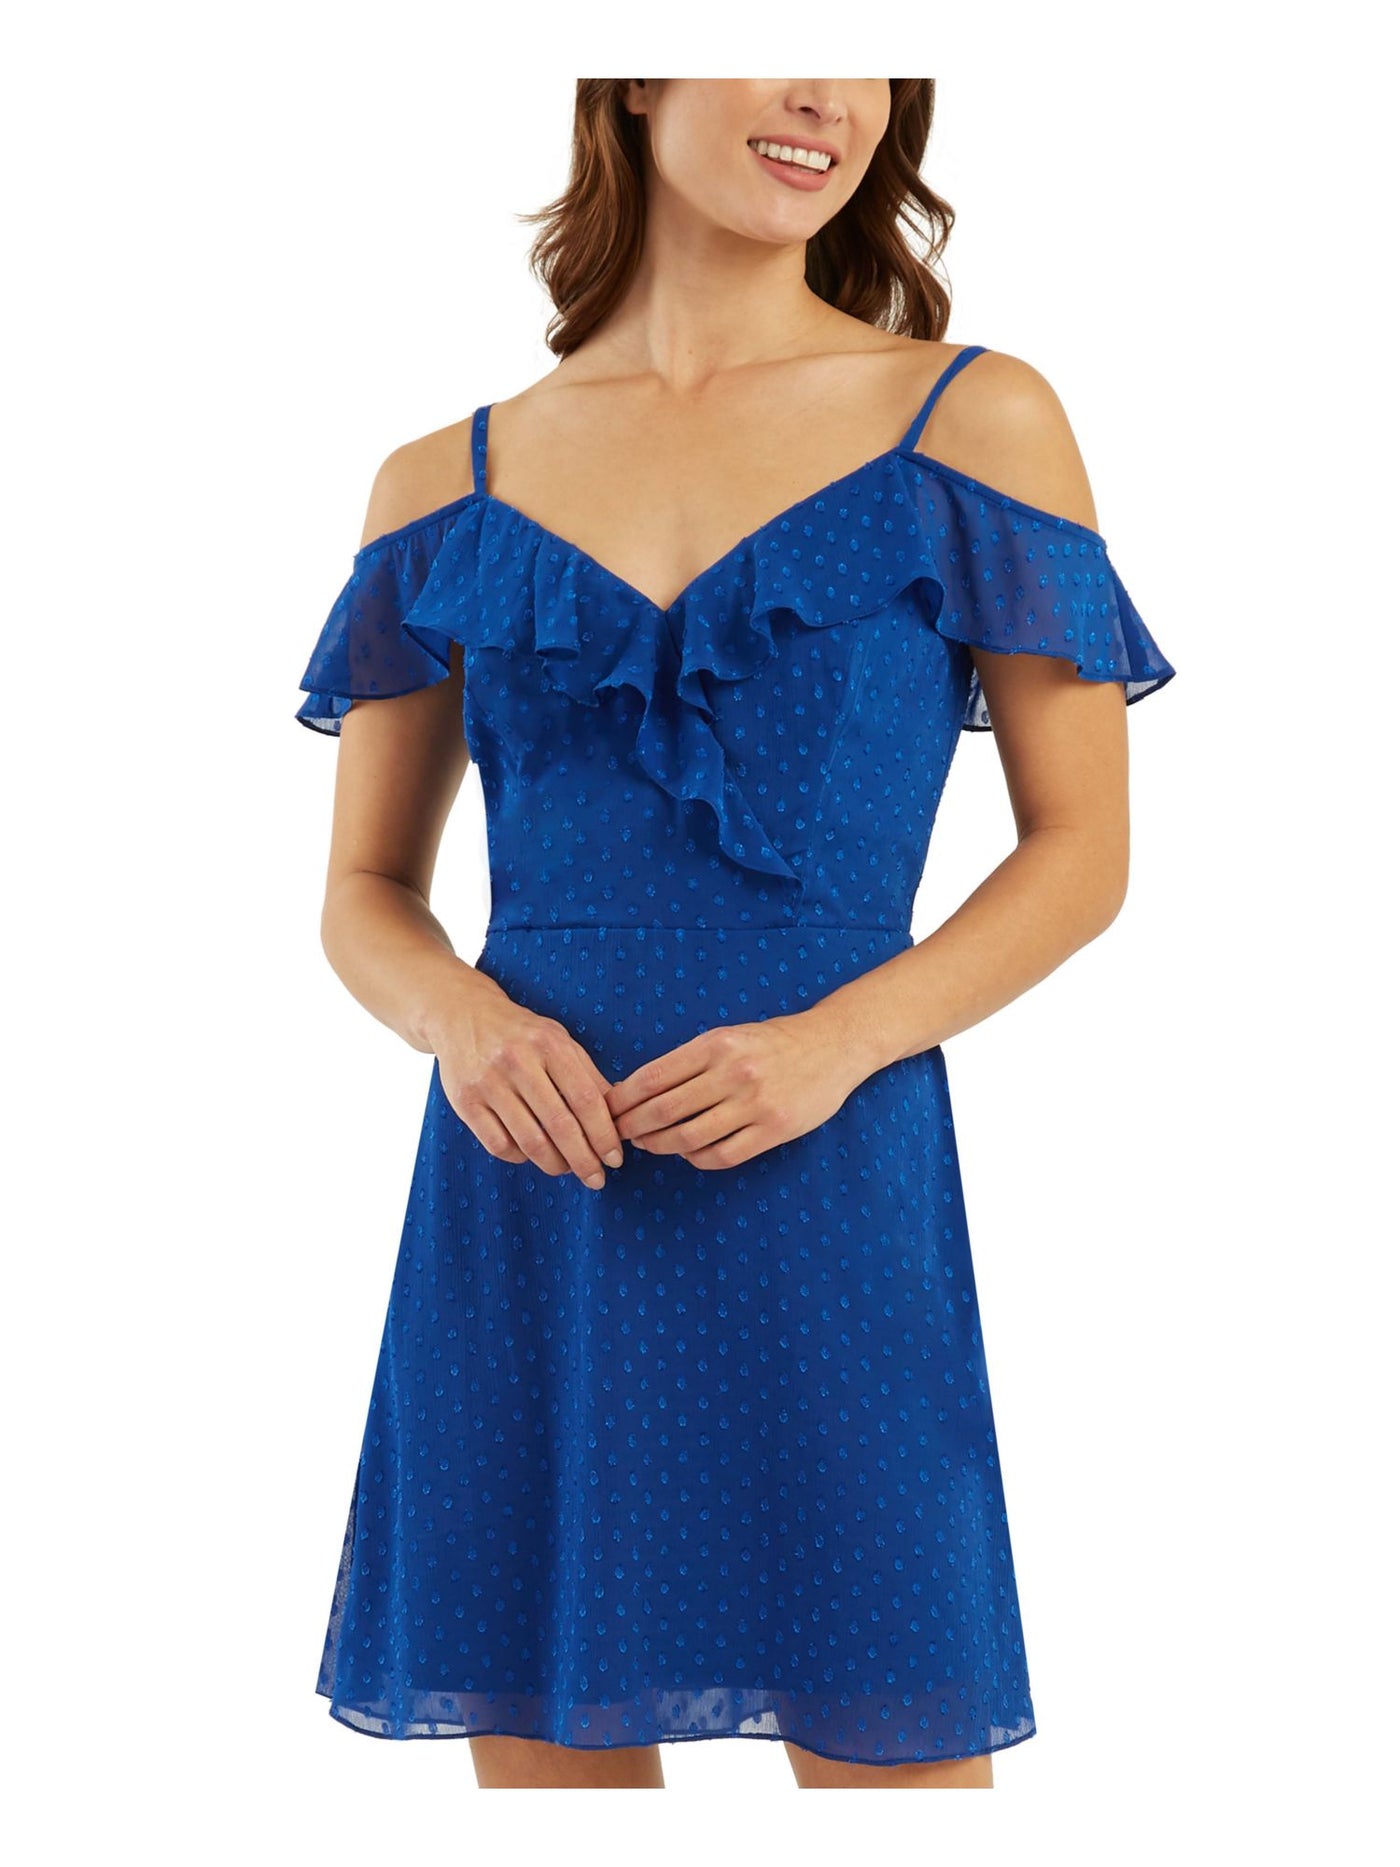 BCX DRESS Womens Blue Adjustable Cold Shoulder Ruffled Tie Sheer Clip Dot Lined Spaghetti Strap V Neck Above The Knee Fit + Flare Dress XS